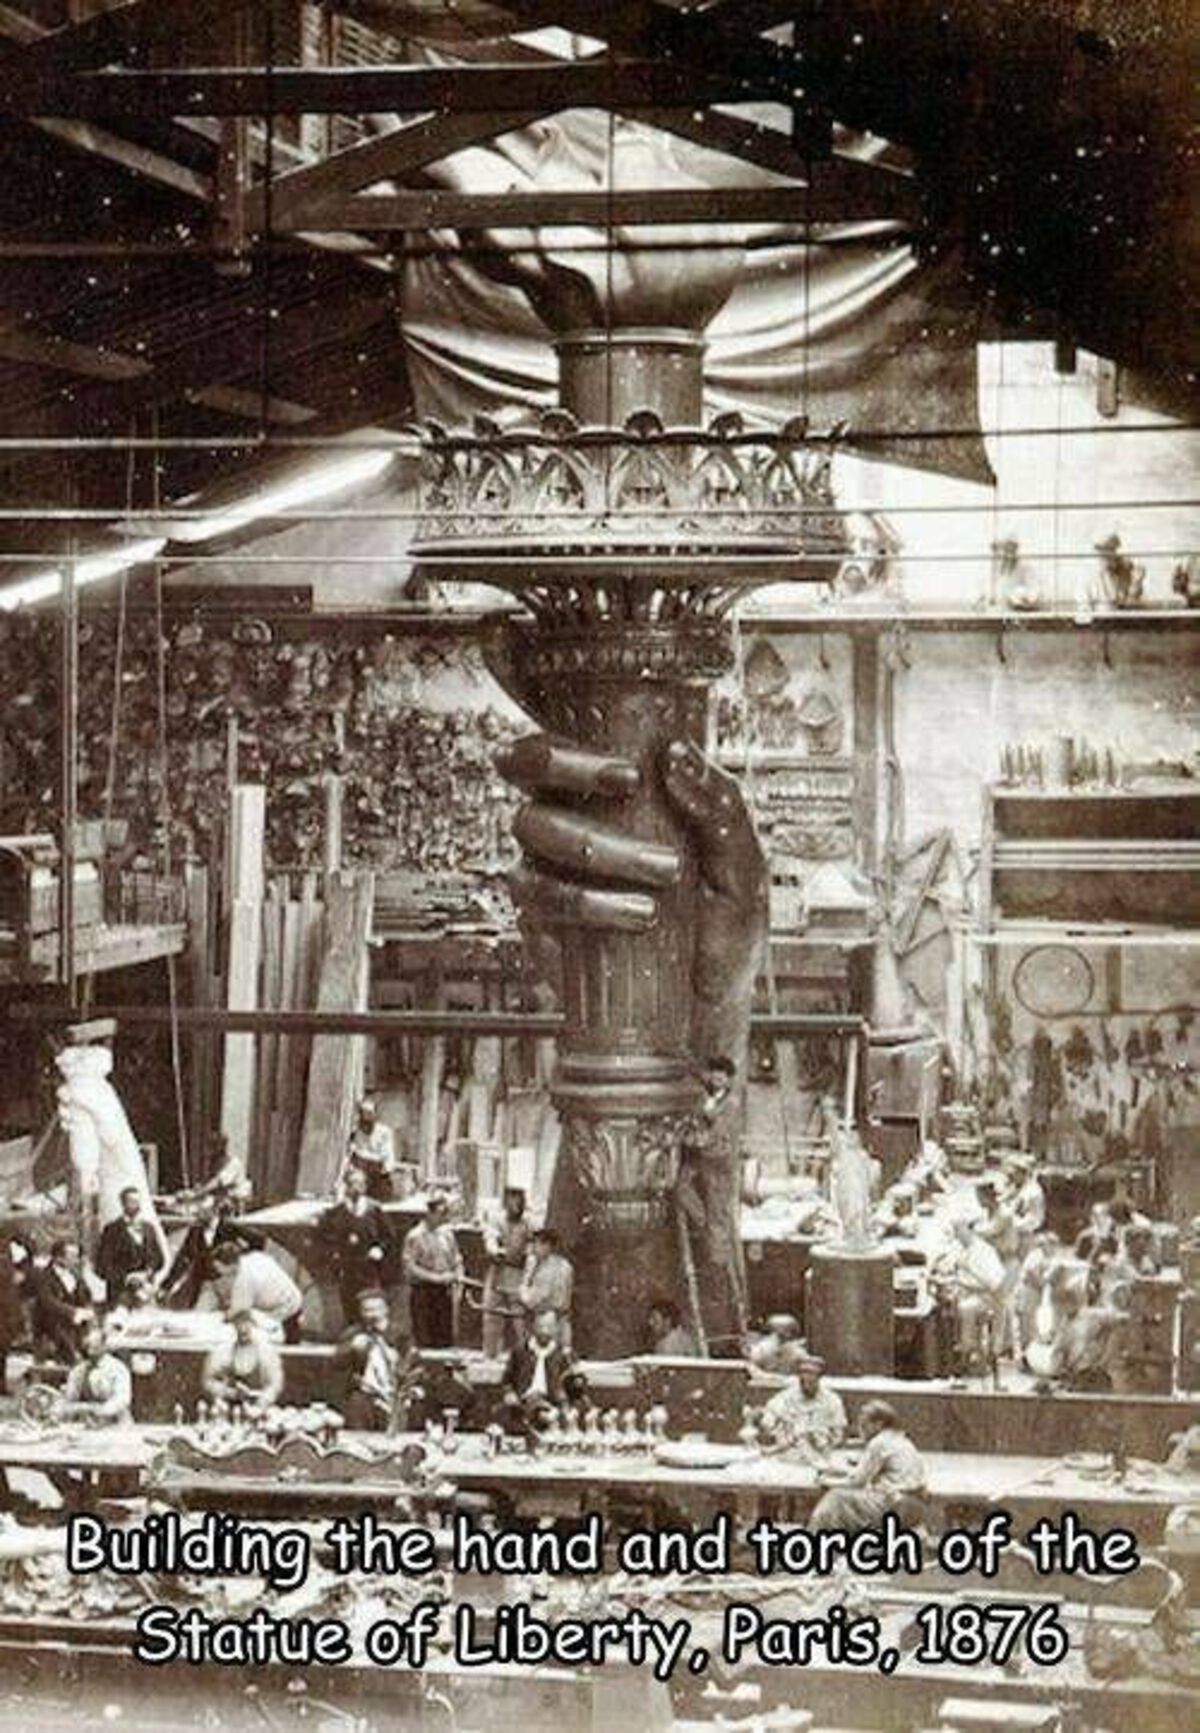 statue of liberty in paris 1886 - Building the hand and torch of the Statue of Liberty, Paris, 1876